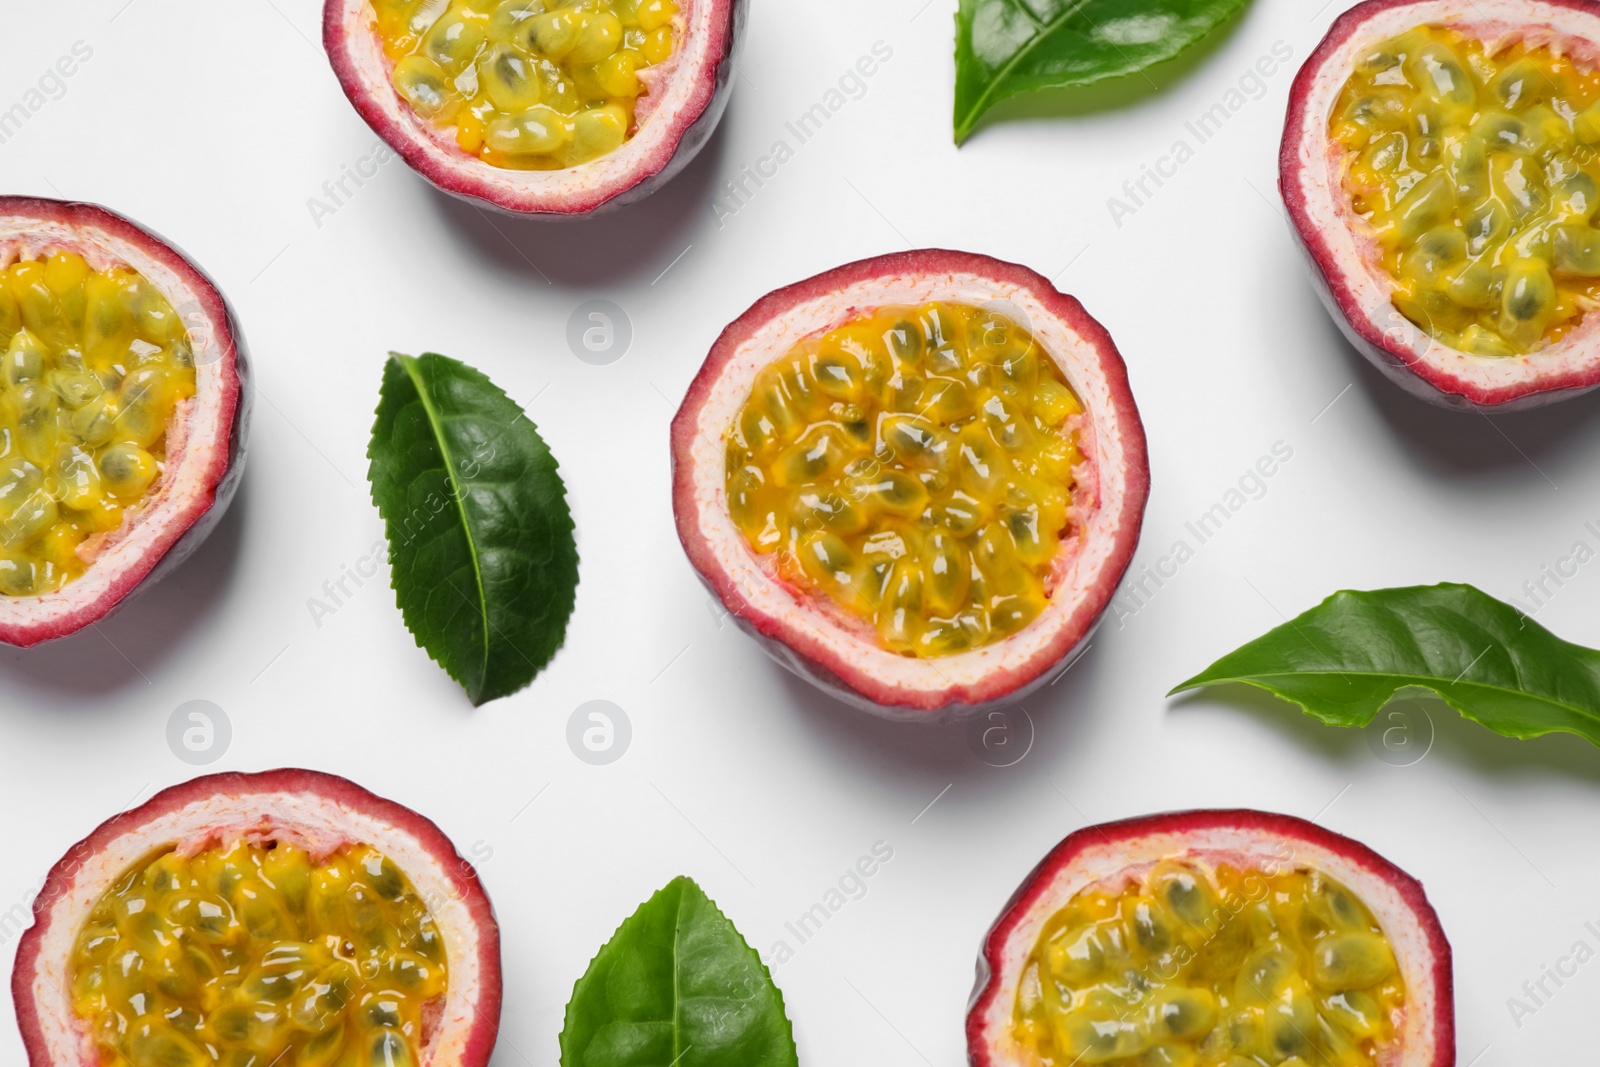 Photo of Halves of passion fruits (maracuyas) and green leaves on white background, flat lay